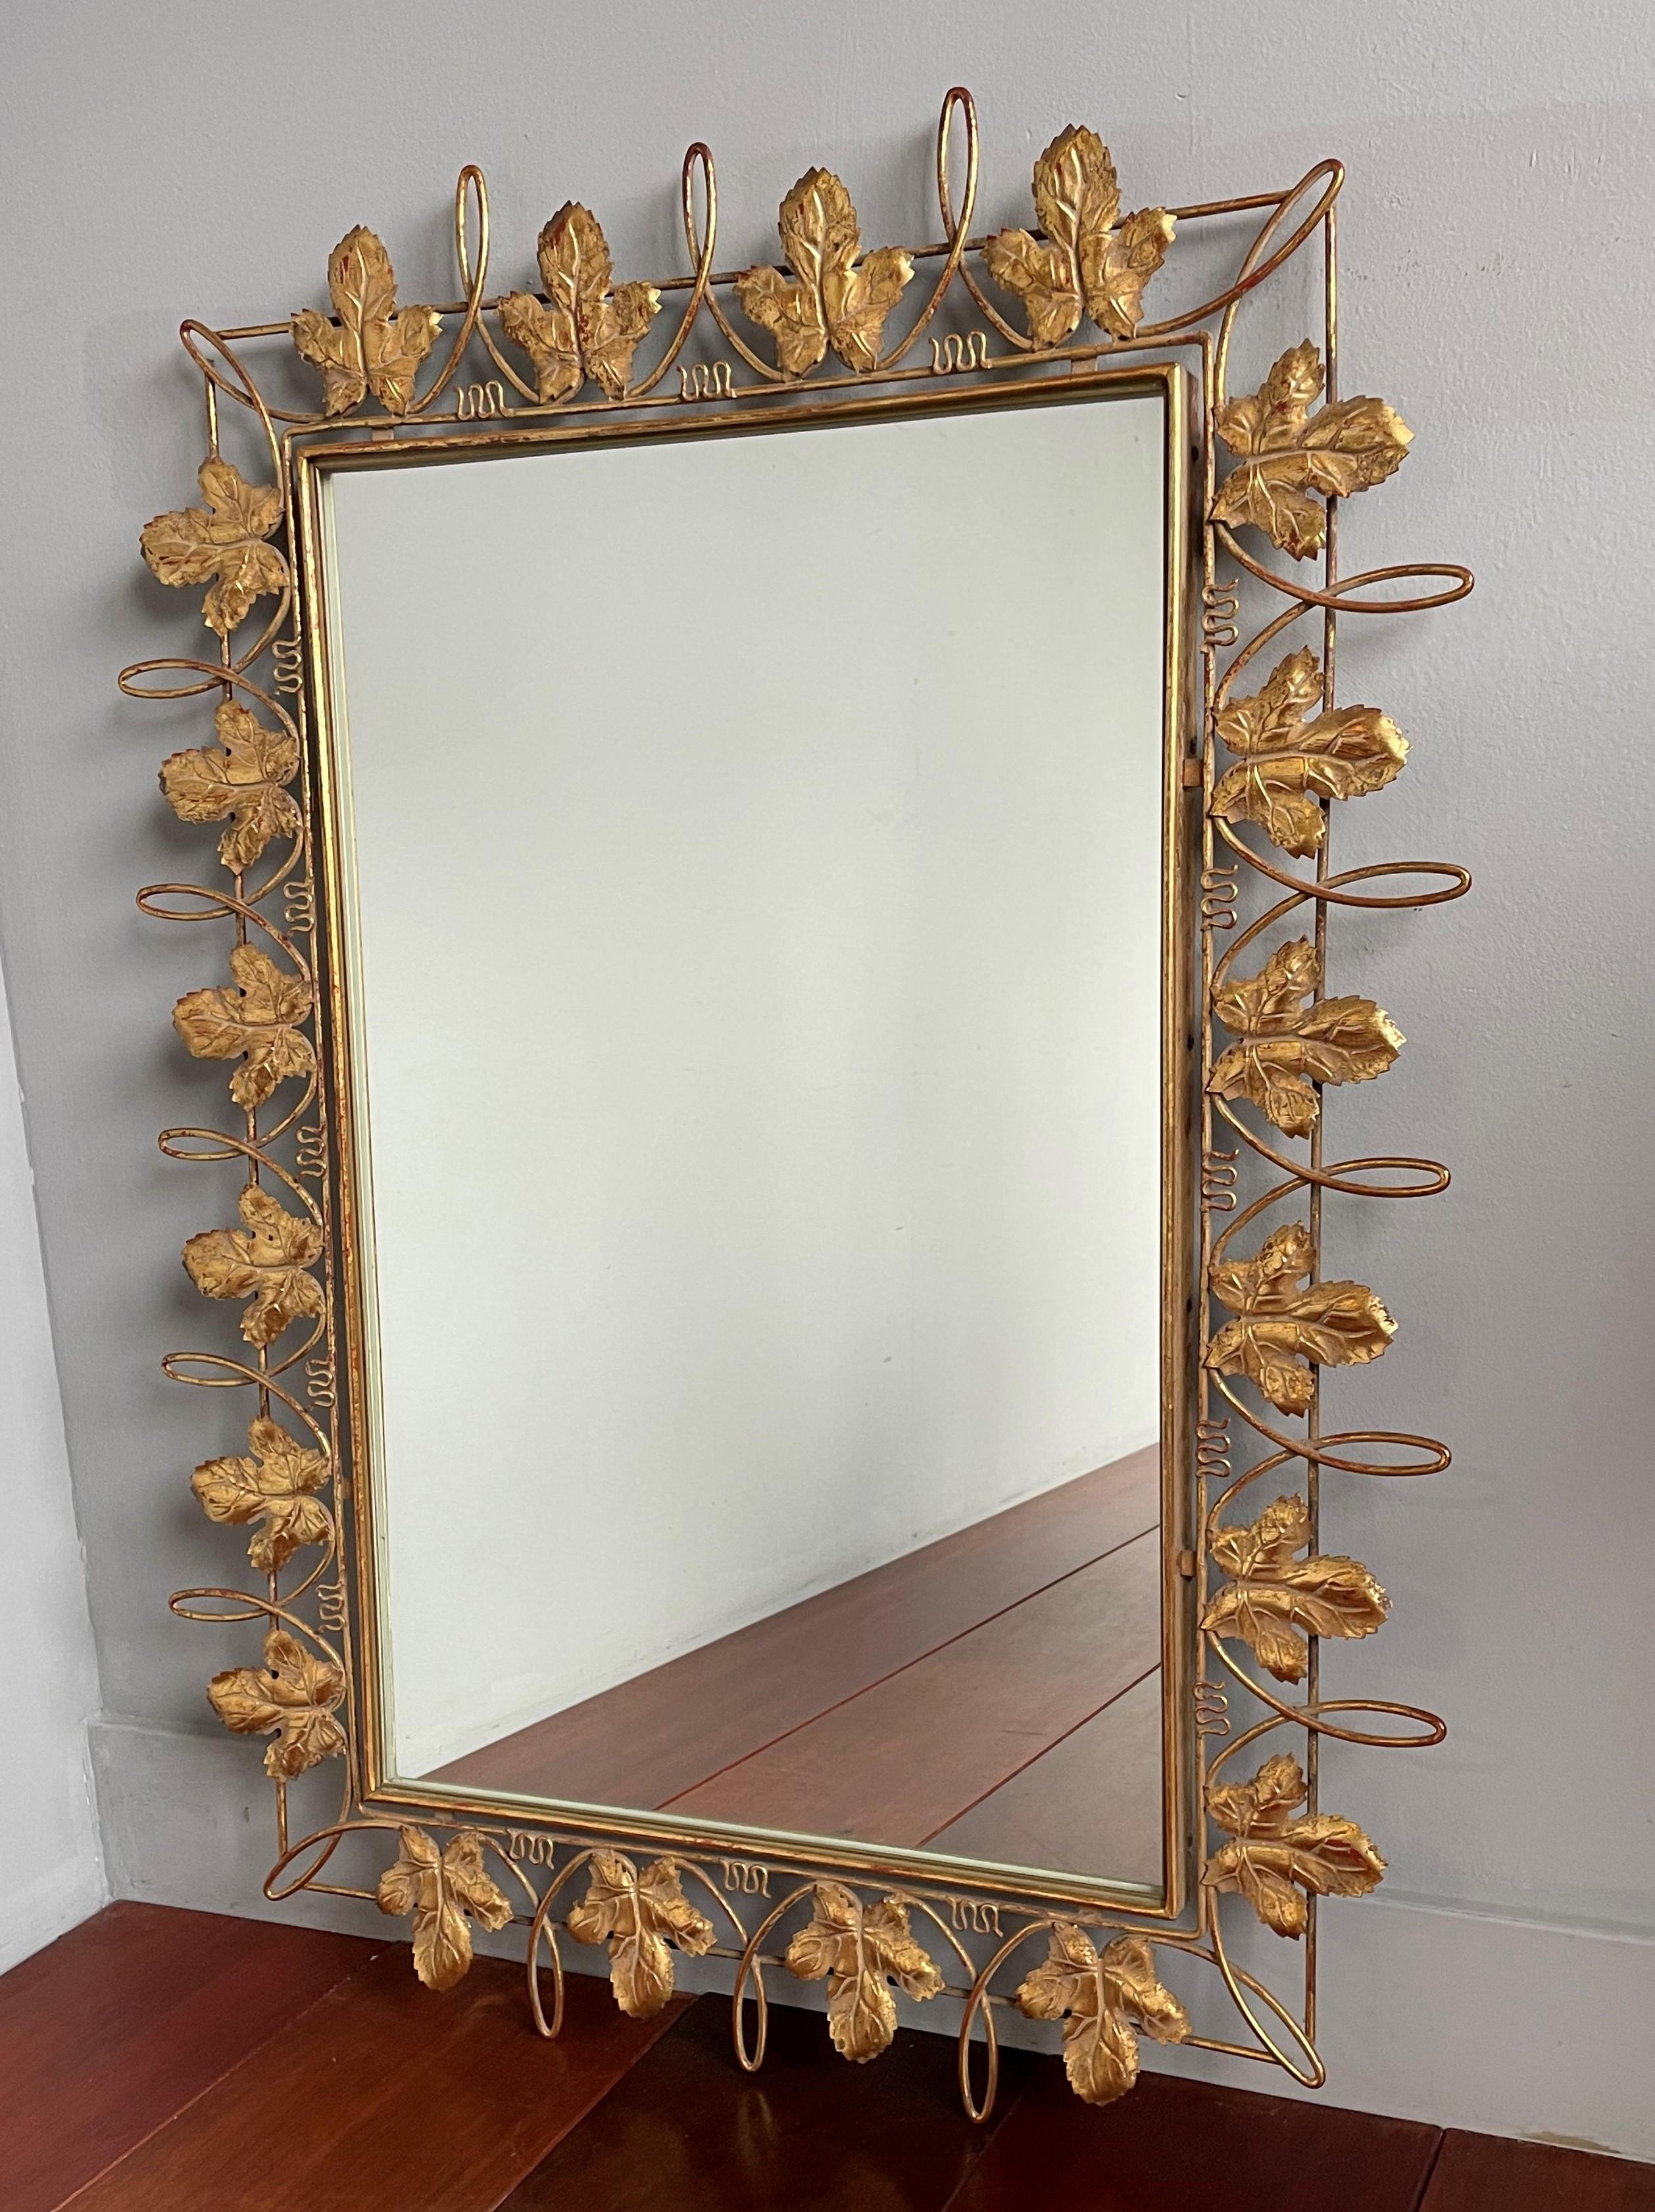 Unique Arts & Crafts Style Wall Mirror w. Gold Painted Grape Leafs / Wine Theme For Sale 3